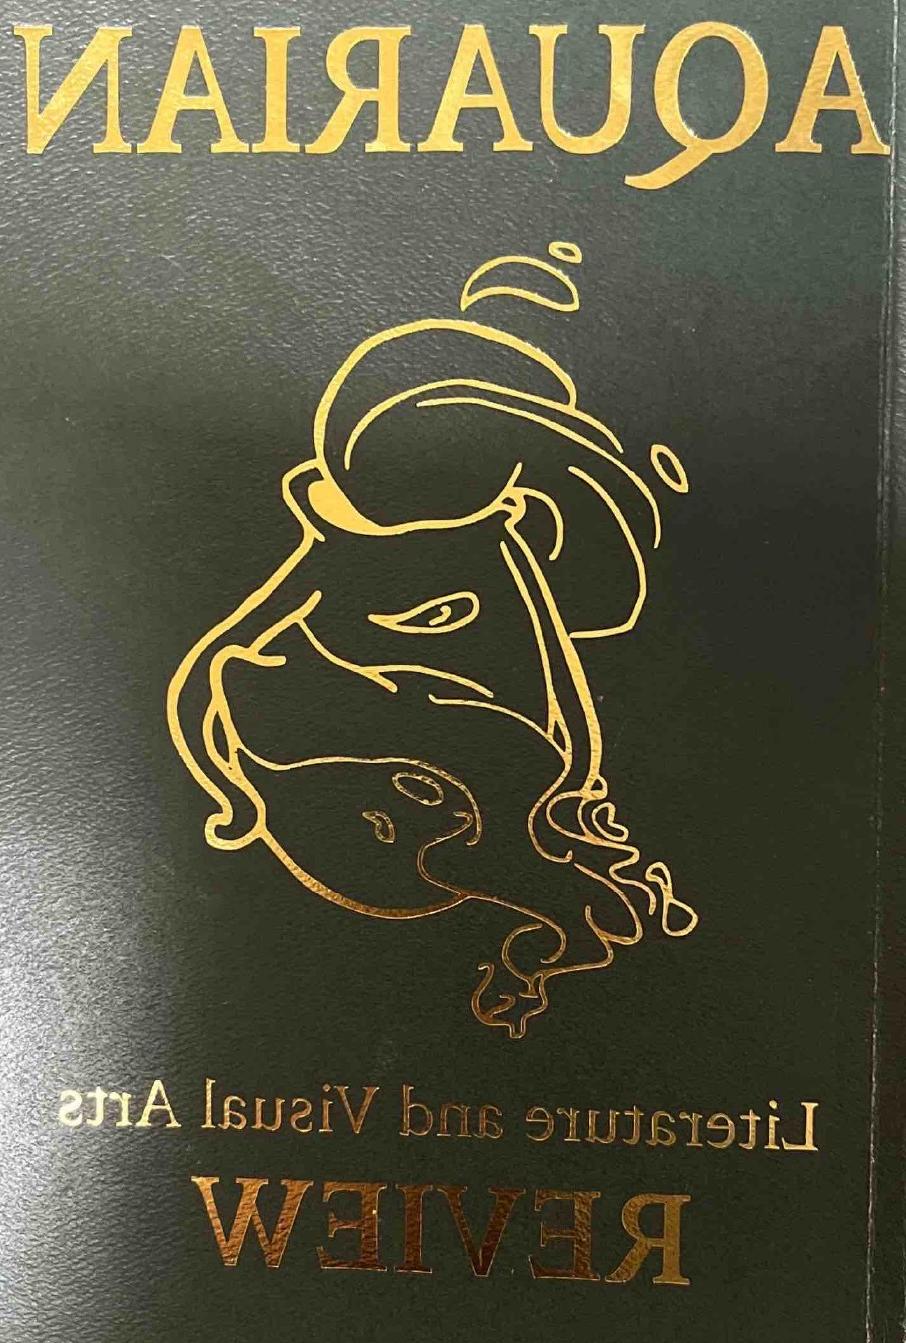 The 2019 cover. It is solid green with shiny gold details. The Title is: 宝瓶座时代的 Review. The subtitle is Literature and Visual Arts. In the center is a gold icon that is a water pitcher, with flowing water around it